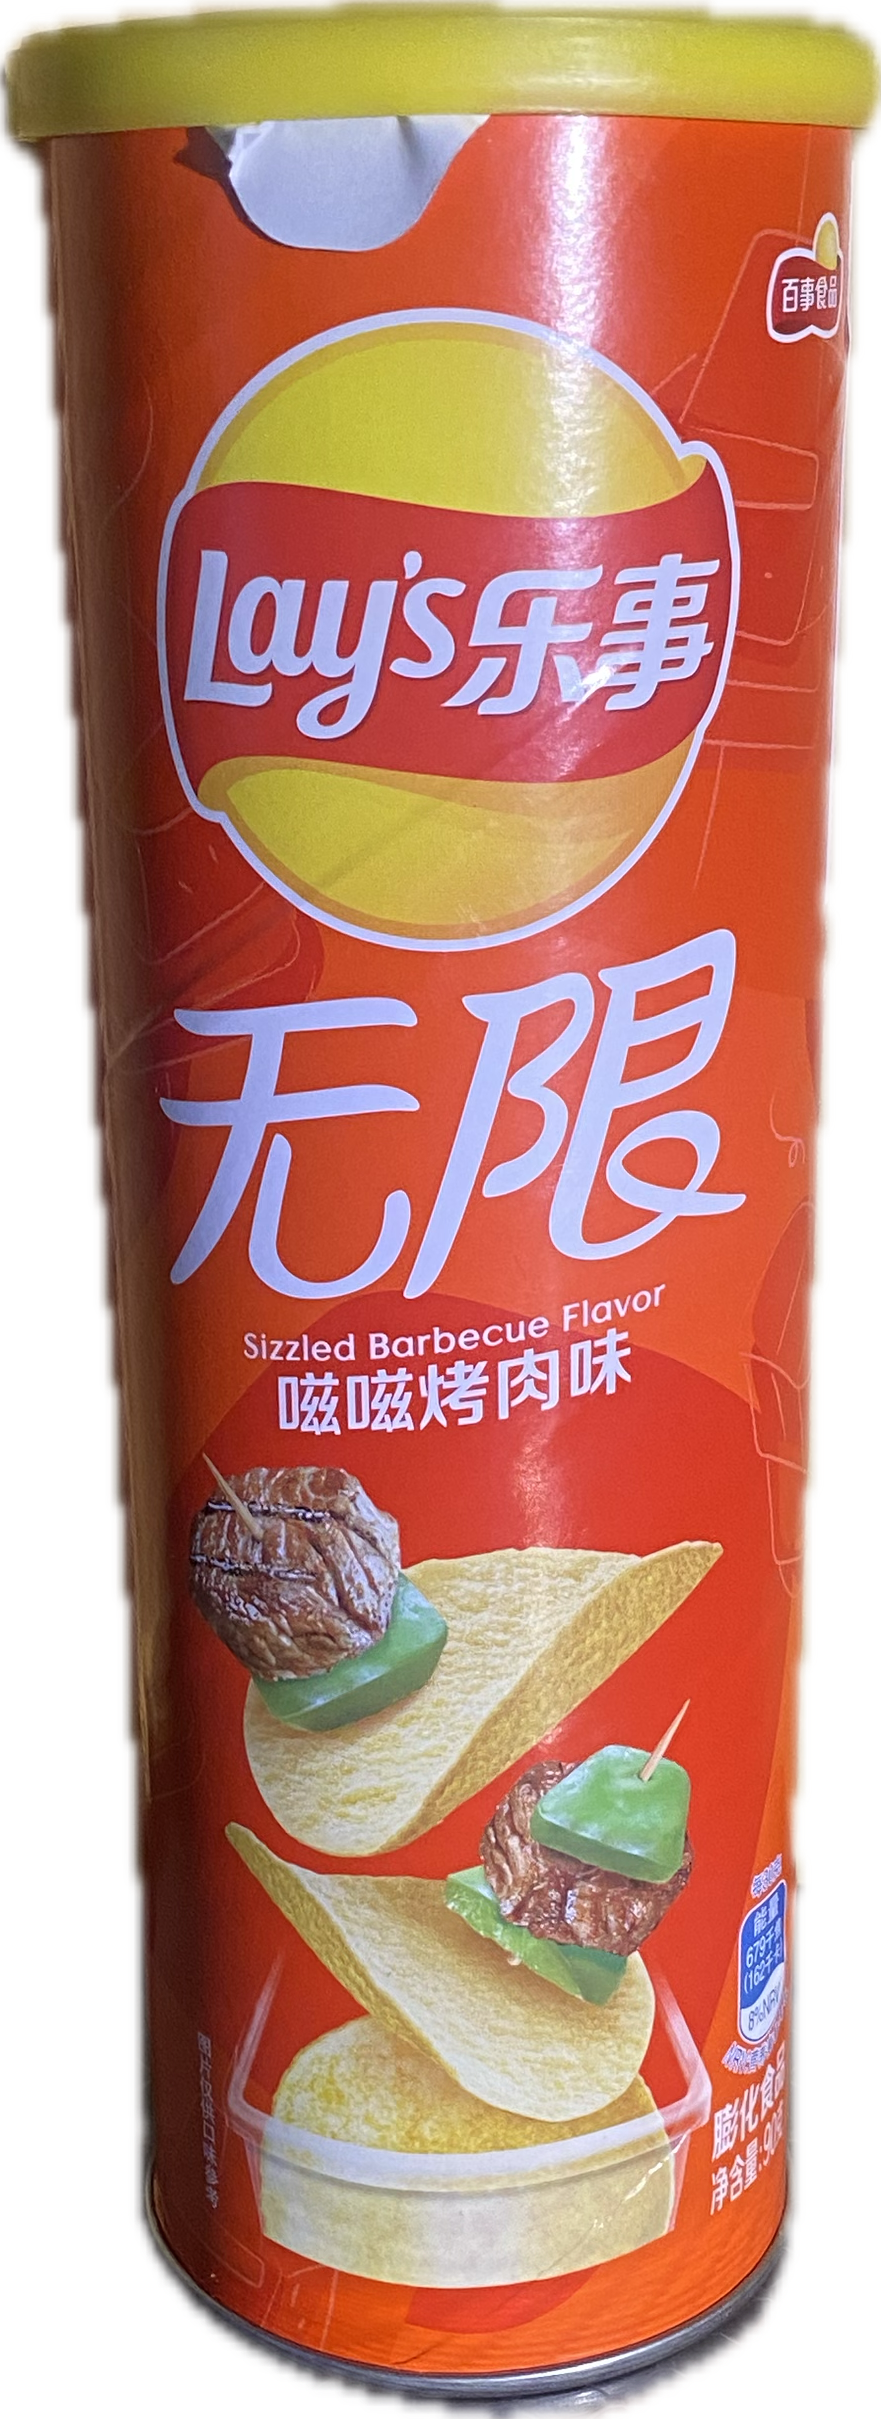 Lays Canned Sizzled Barbecue Flavor